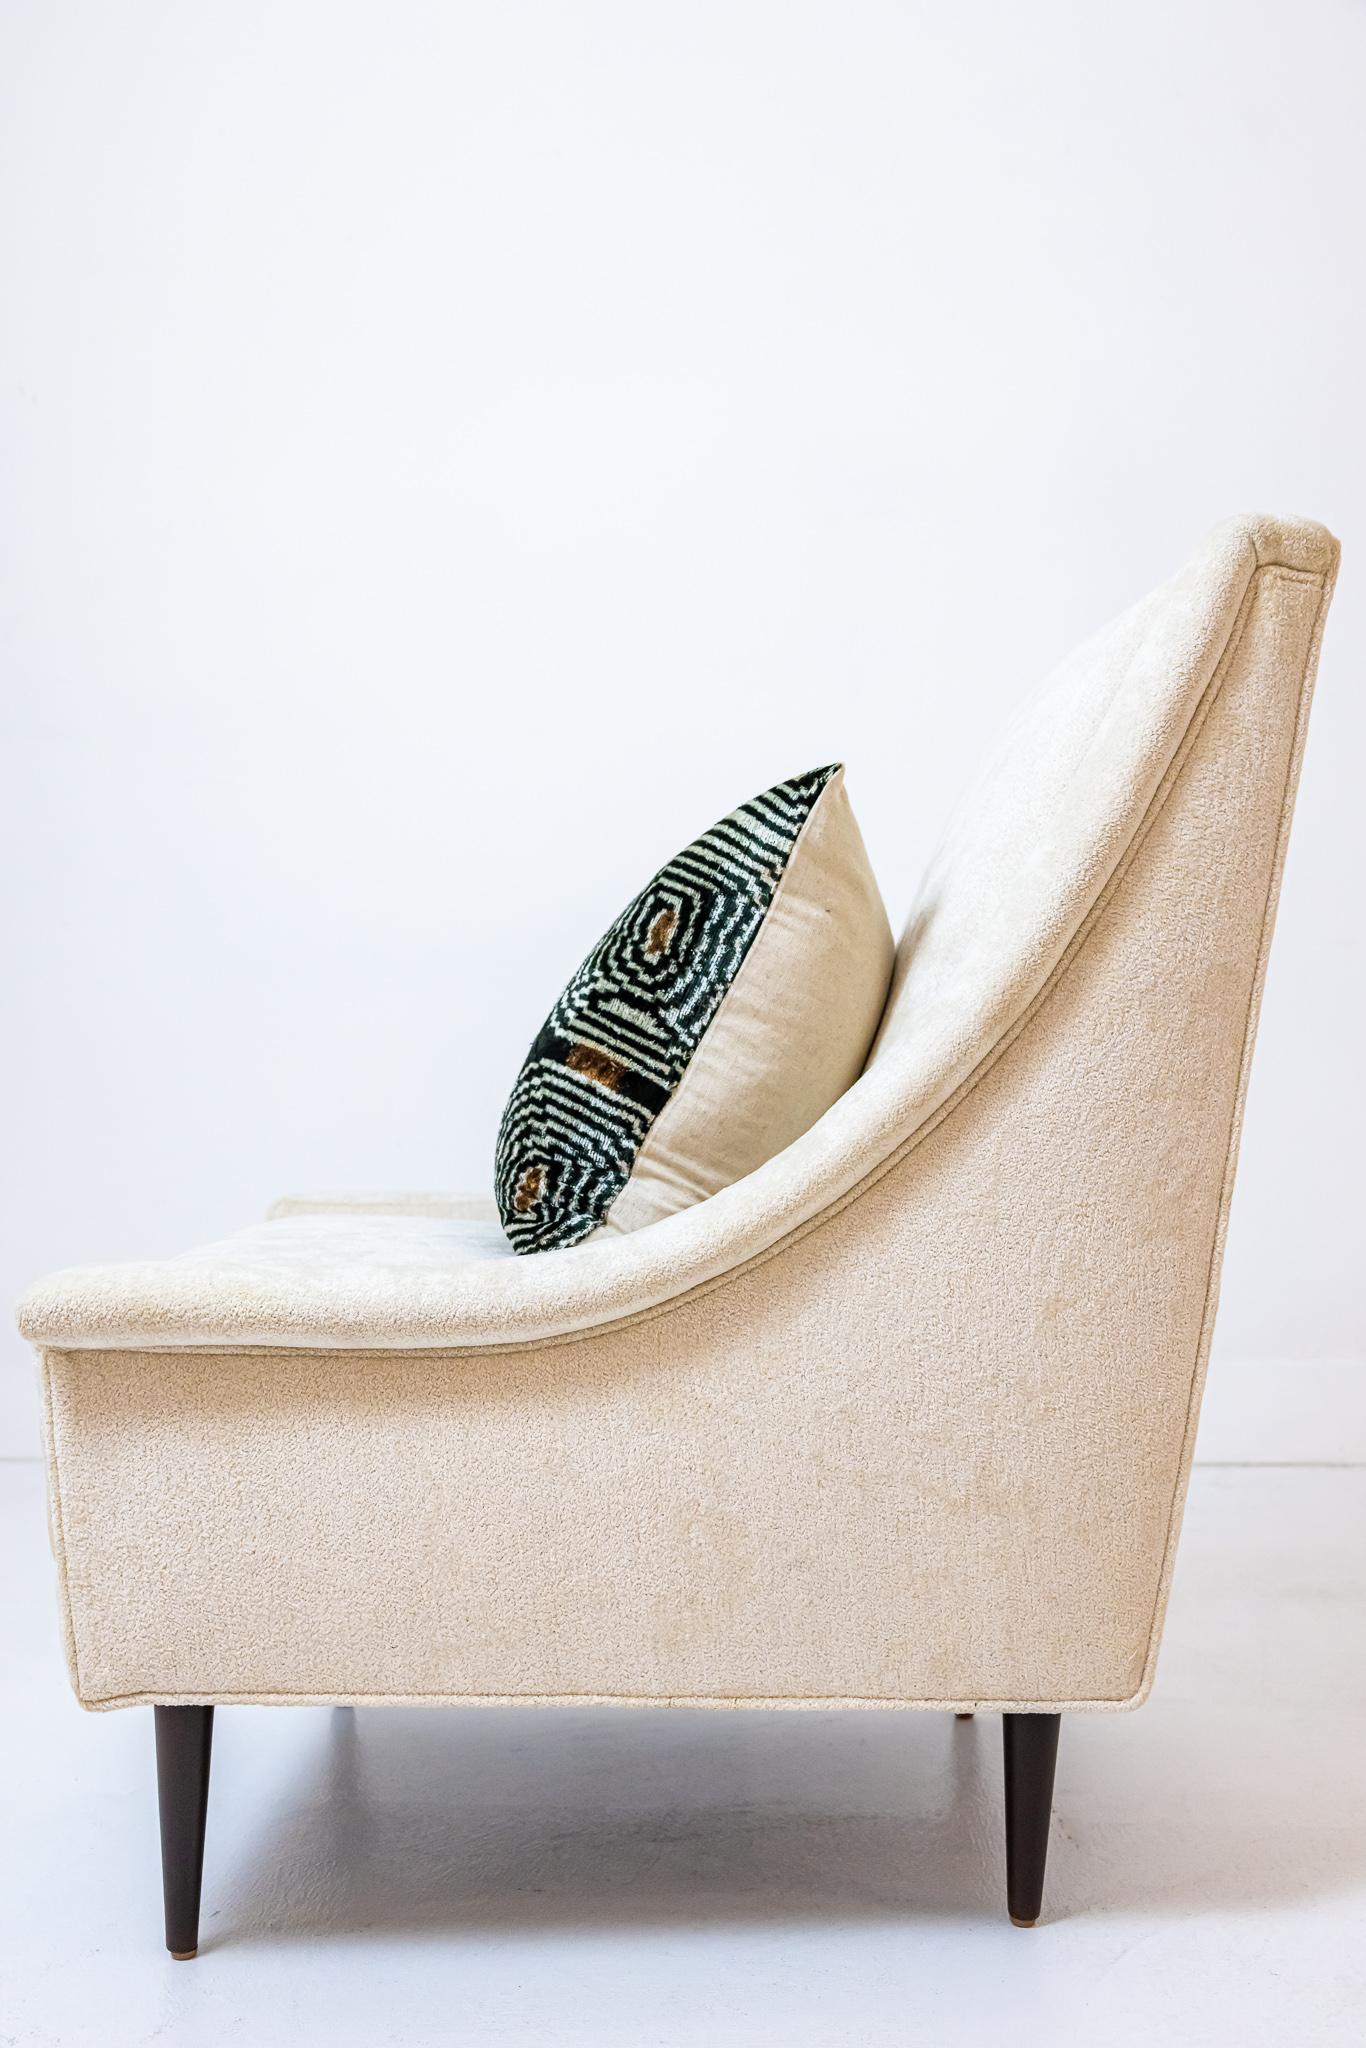 This is a stylish and classic mid century arm chair that has been newly upholstered in a beautiful soft cream chenille fabric. Four dark wooden legs support the chair. This would be amazing as a lounge chair in a bedroom or a side chair in any